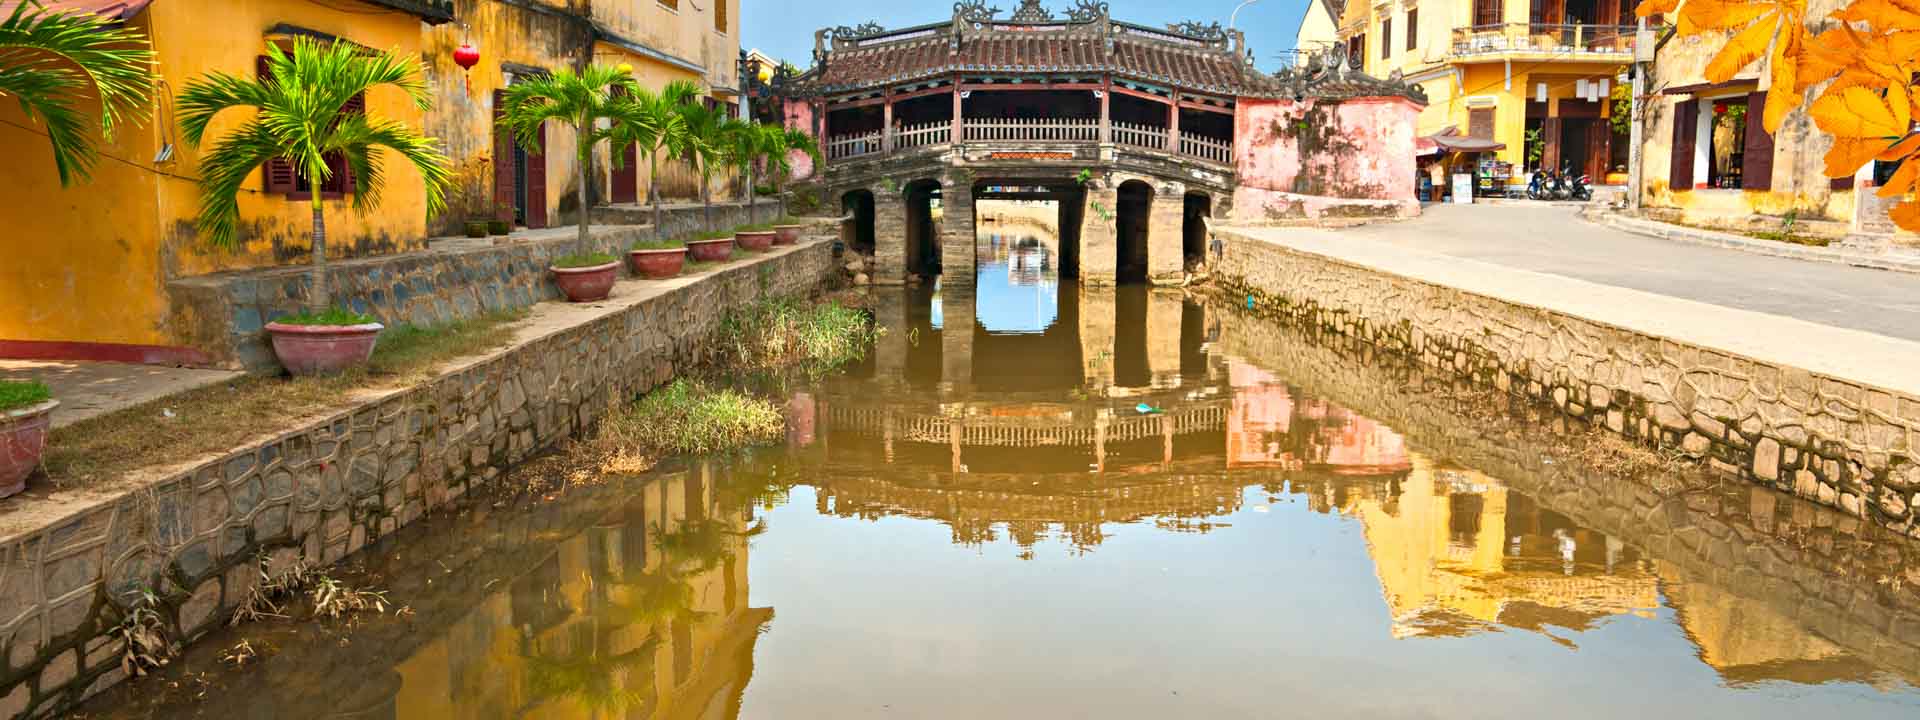 Highlights of Vietnam and Cambodia Tour 24 days